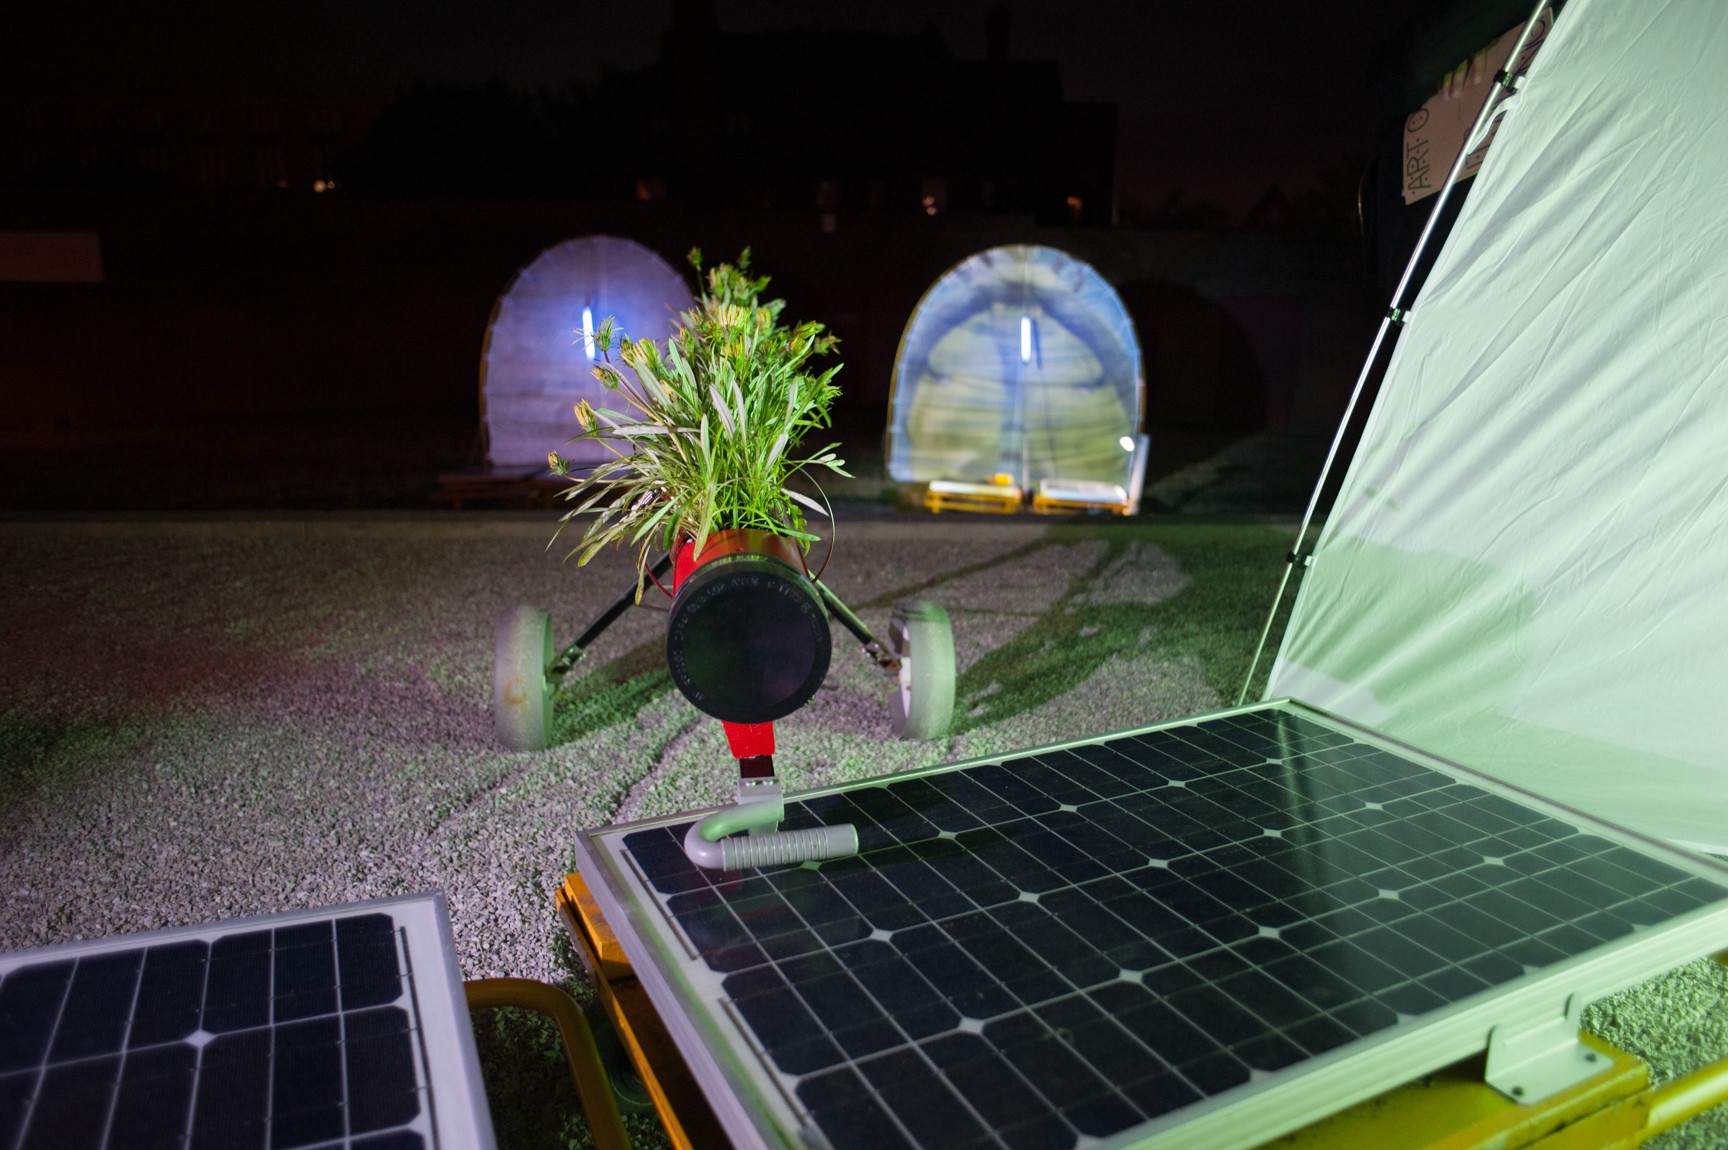 Solar panels and a plant on wheels.